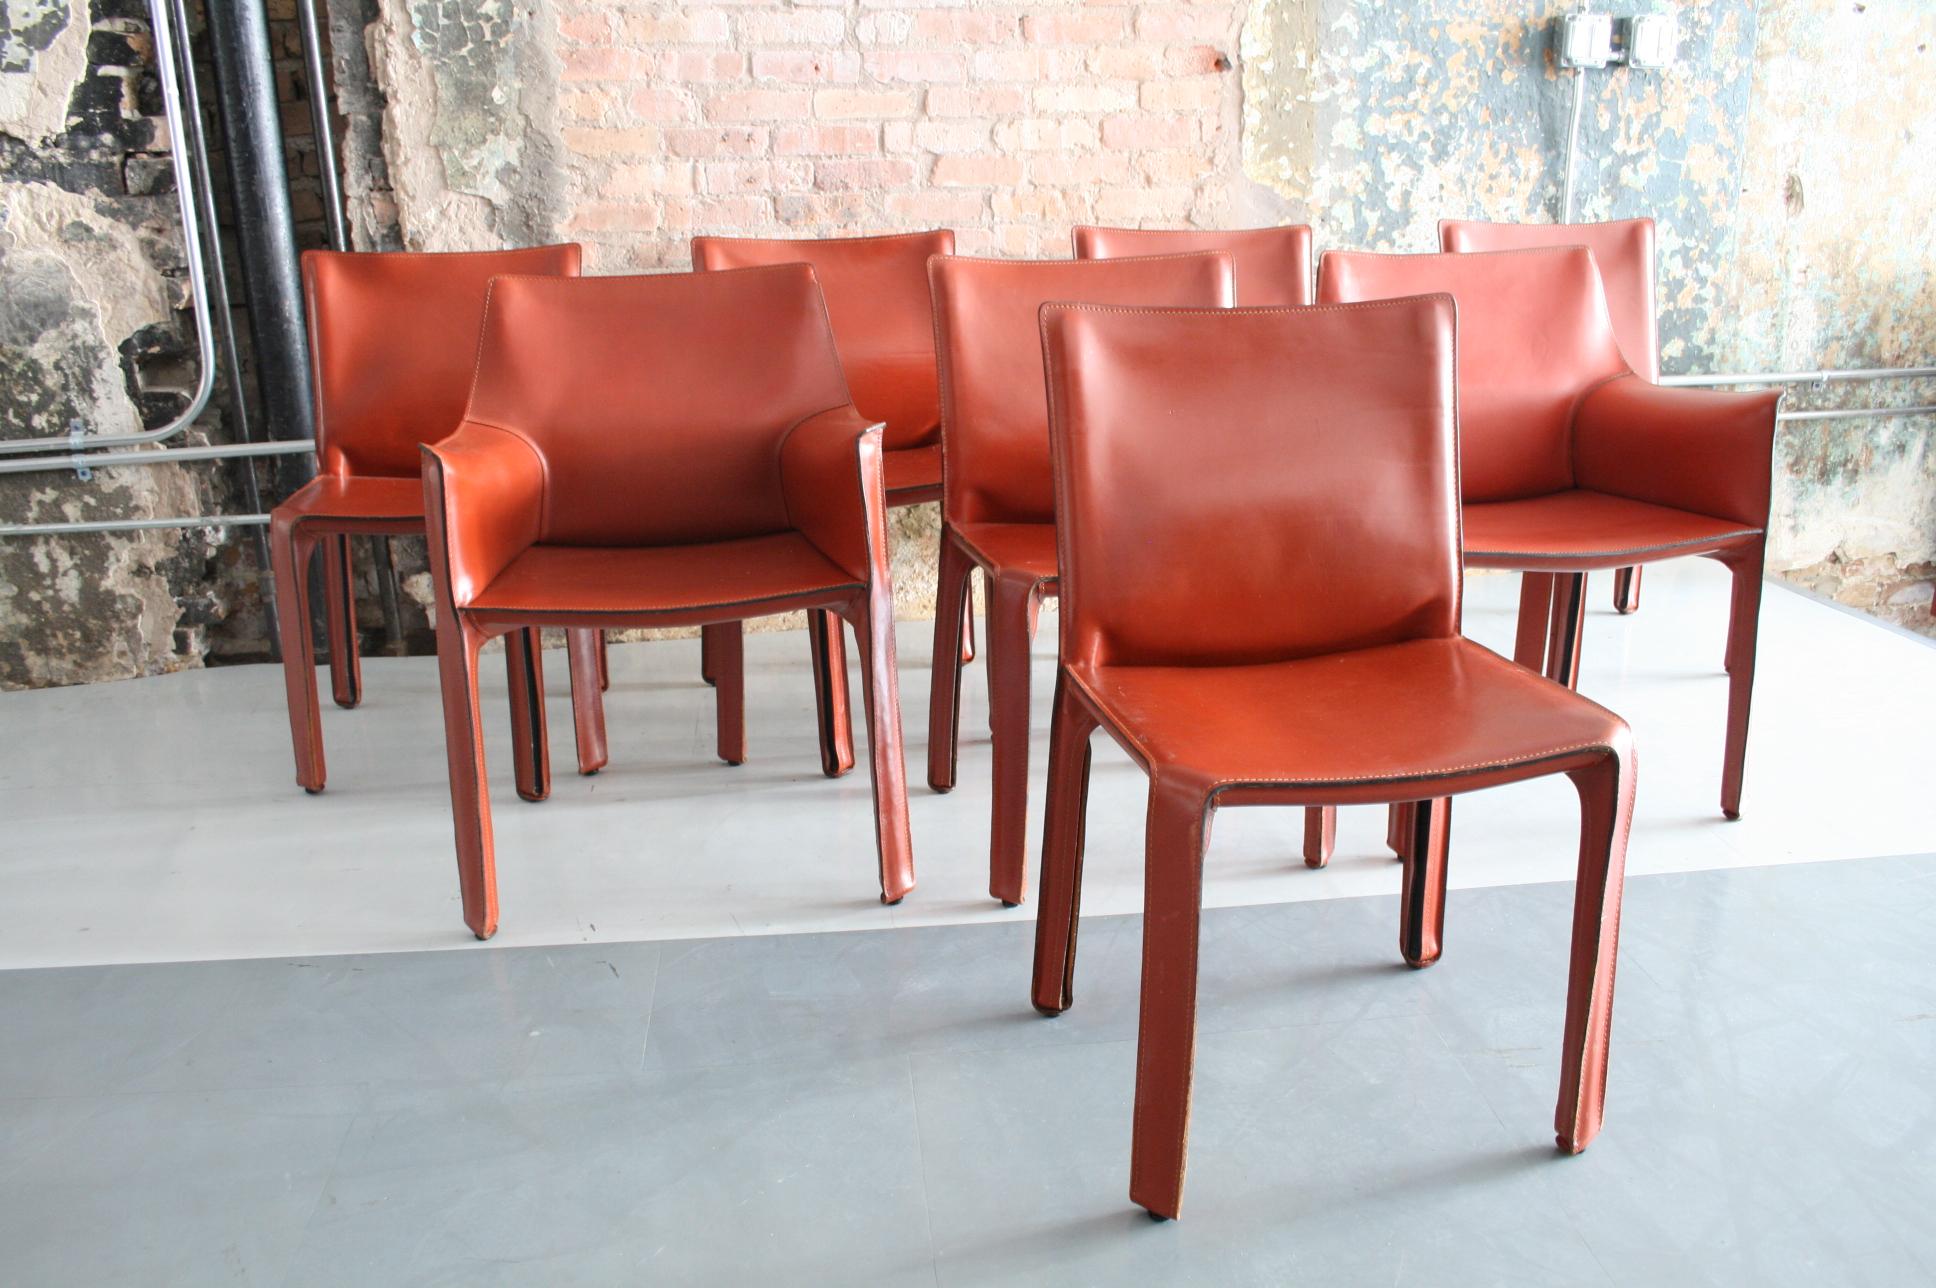 Italian Set of 8 Original Leather 'Cab' Chairs by Mario Bellini for Cassina Italy